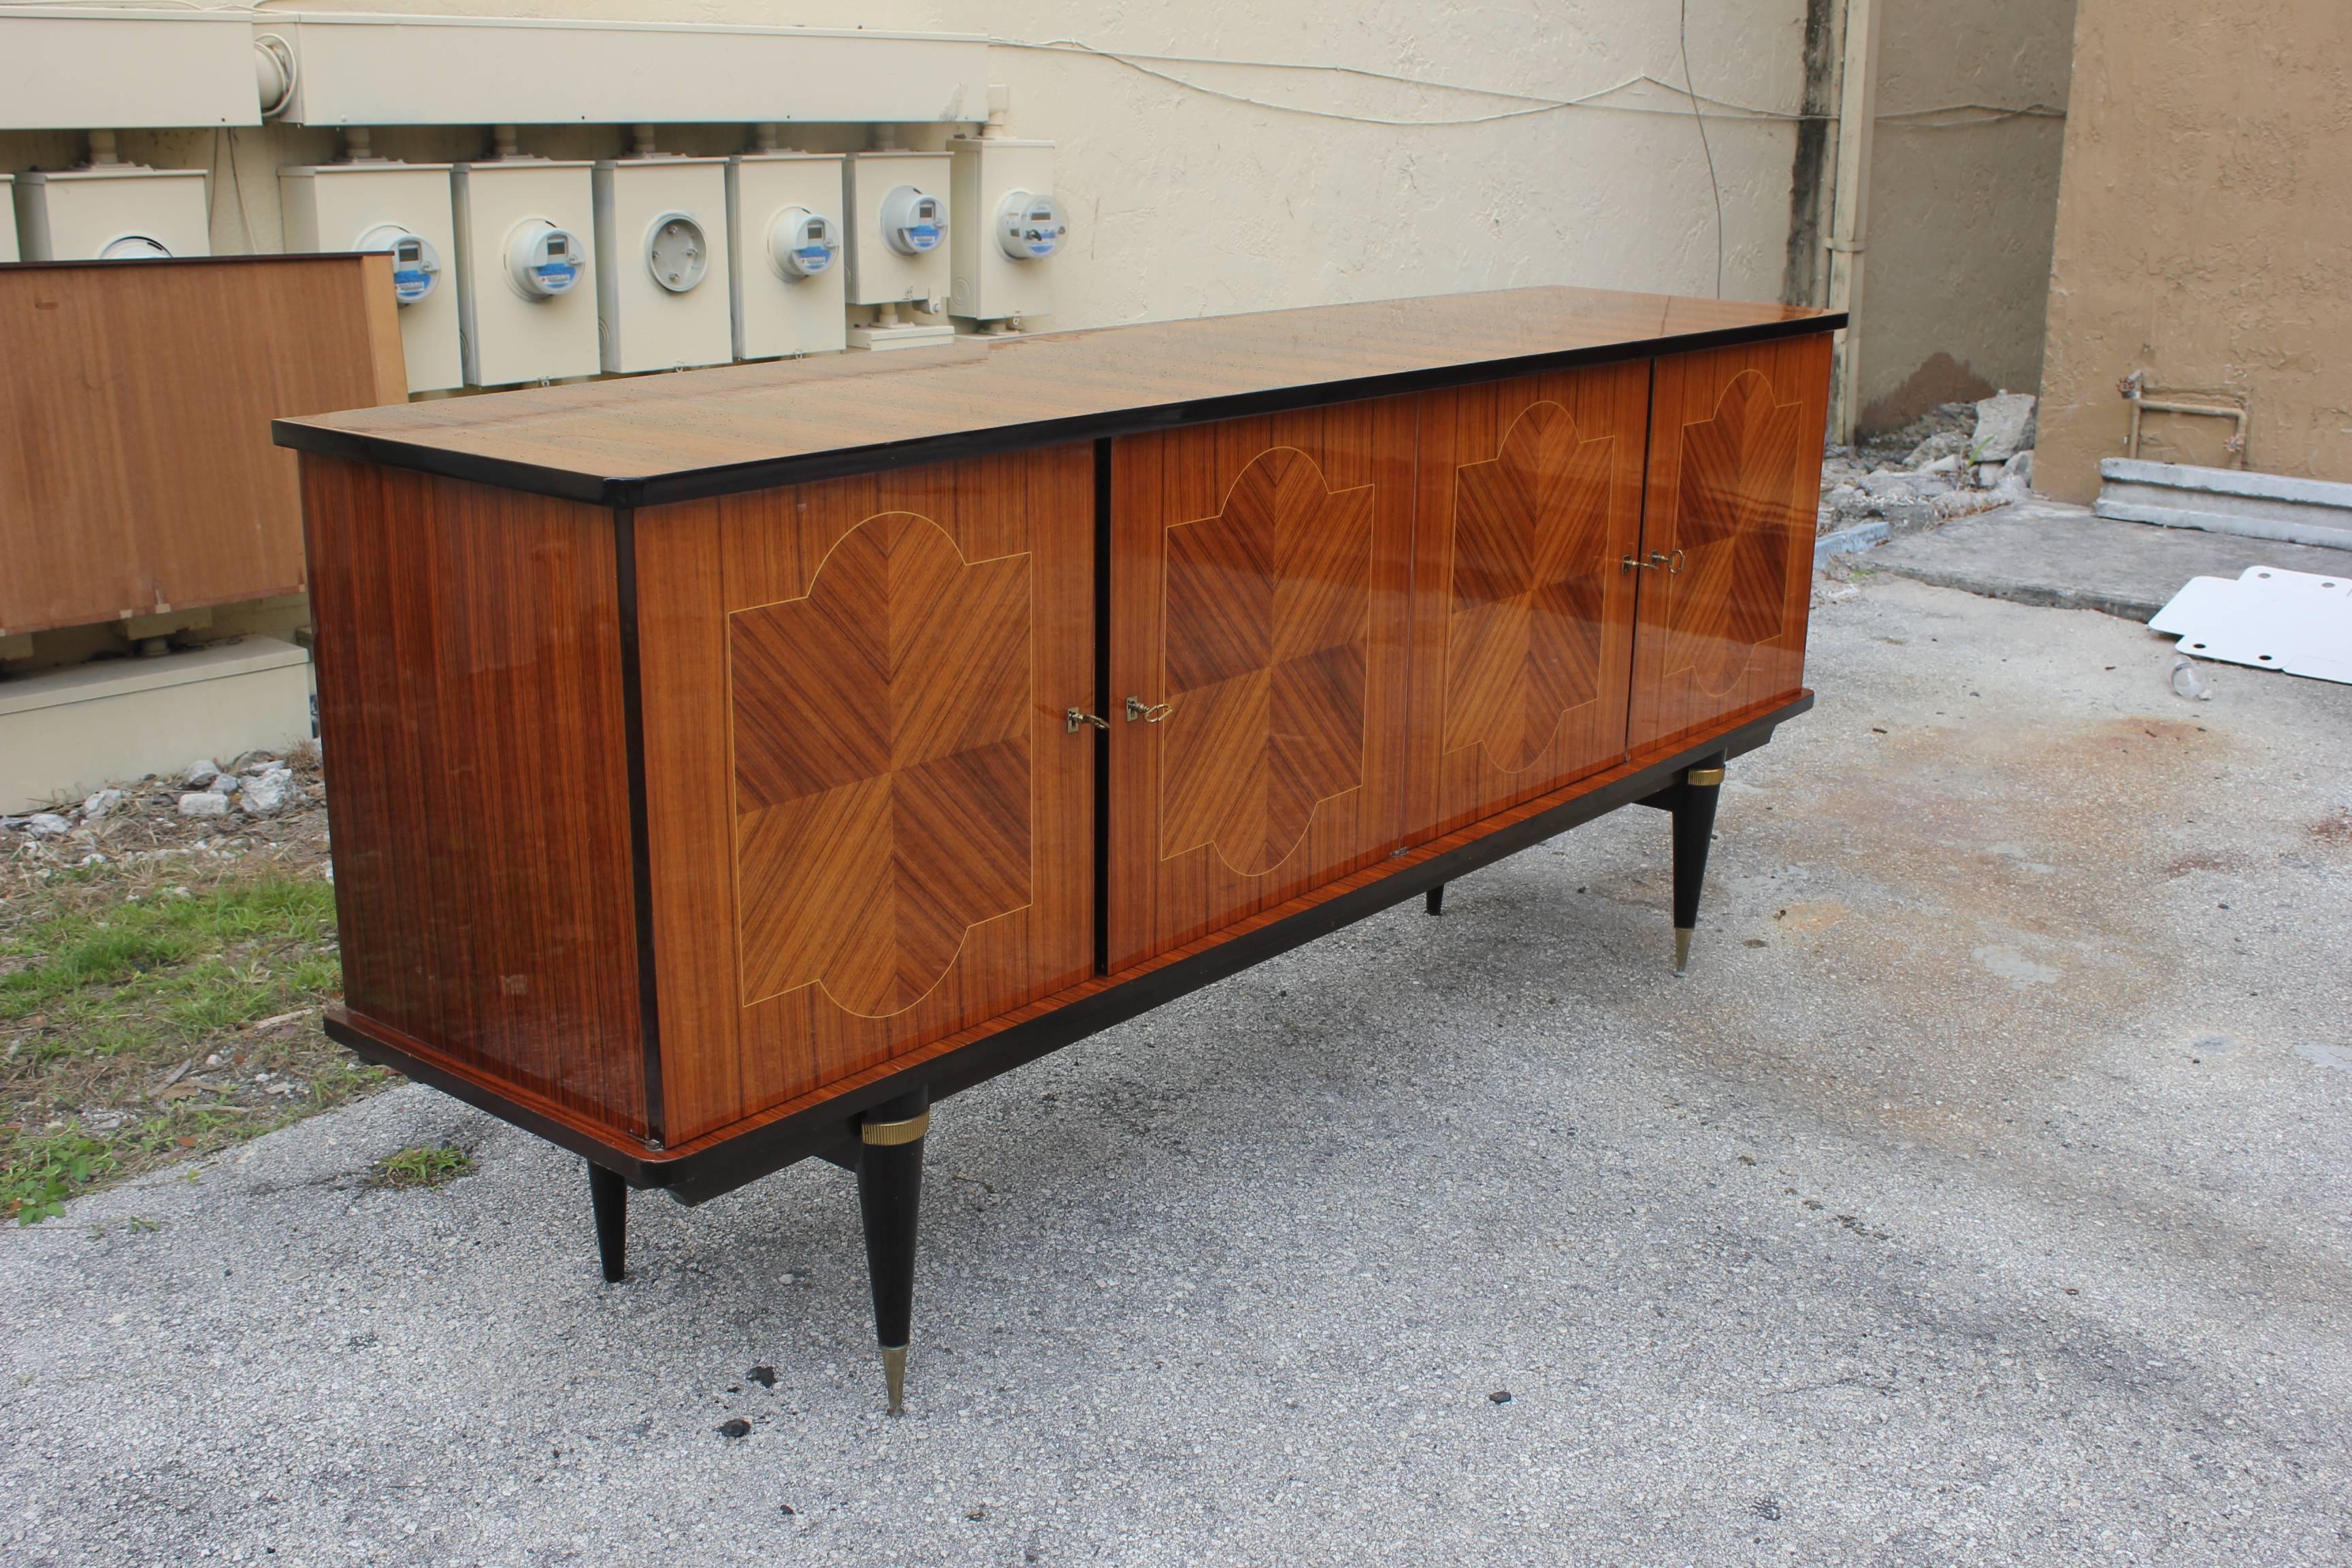 French Art Deco light Macassar ebony sideboard or buffet high gloss finish, marquetry design all four keys present, circa 1940, Please note these buffets can be taken apart to accommodate elevator needs if necessary.